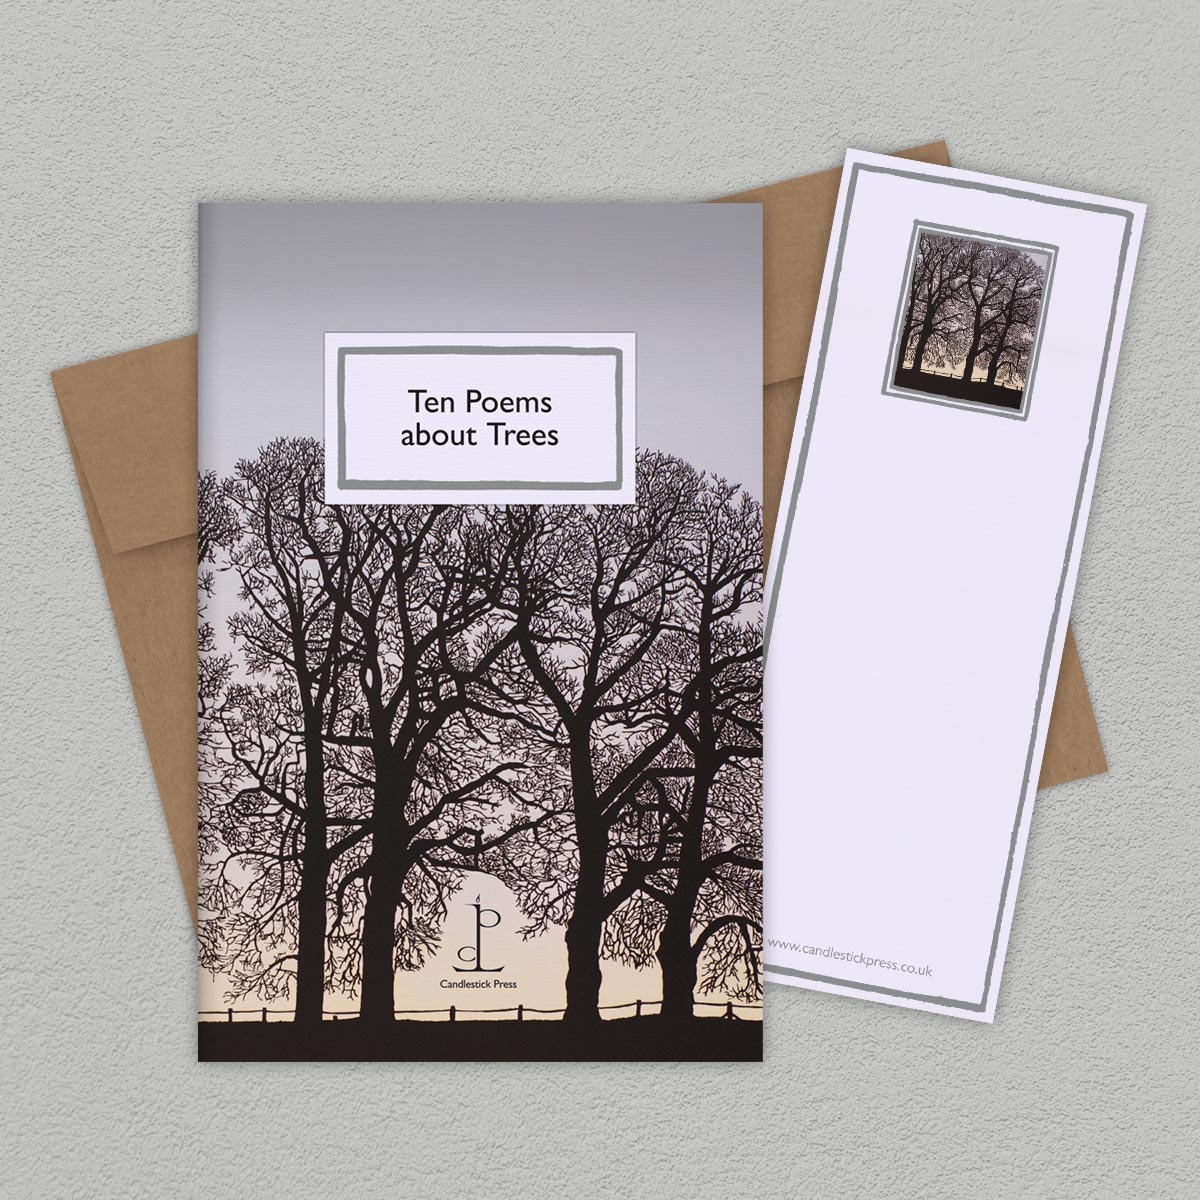 The Poem Pamphlet, 'Ten Poems about Trees' sits on a light grey background with the bookmark and brown envelope.